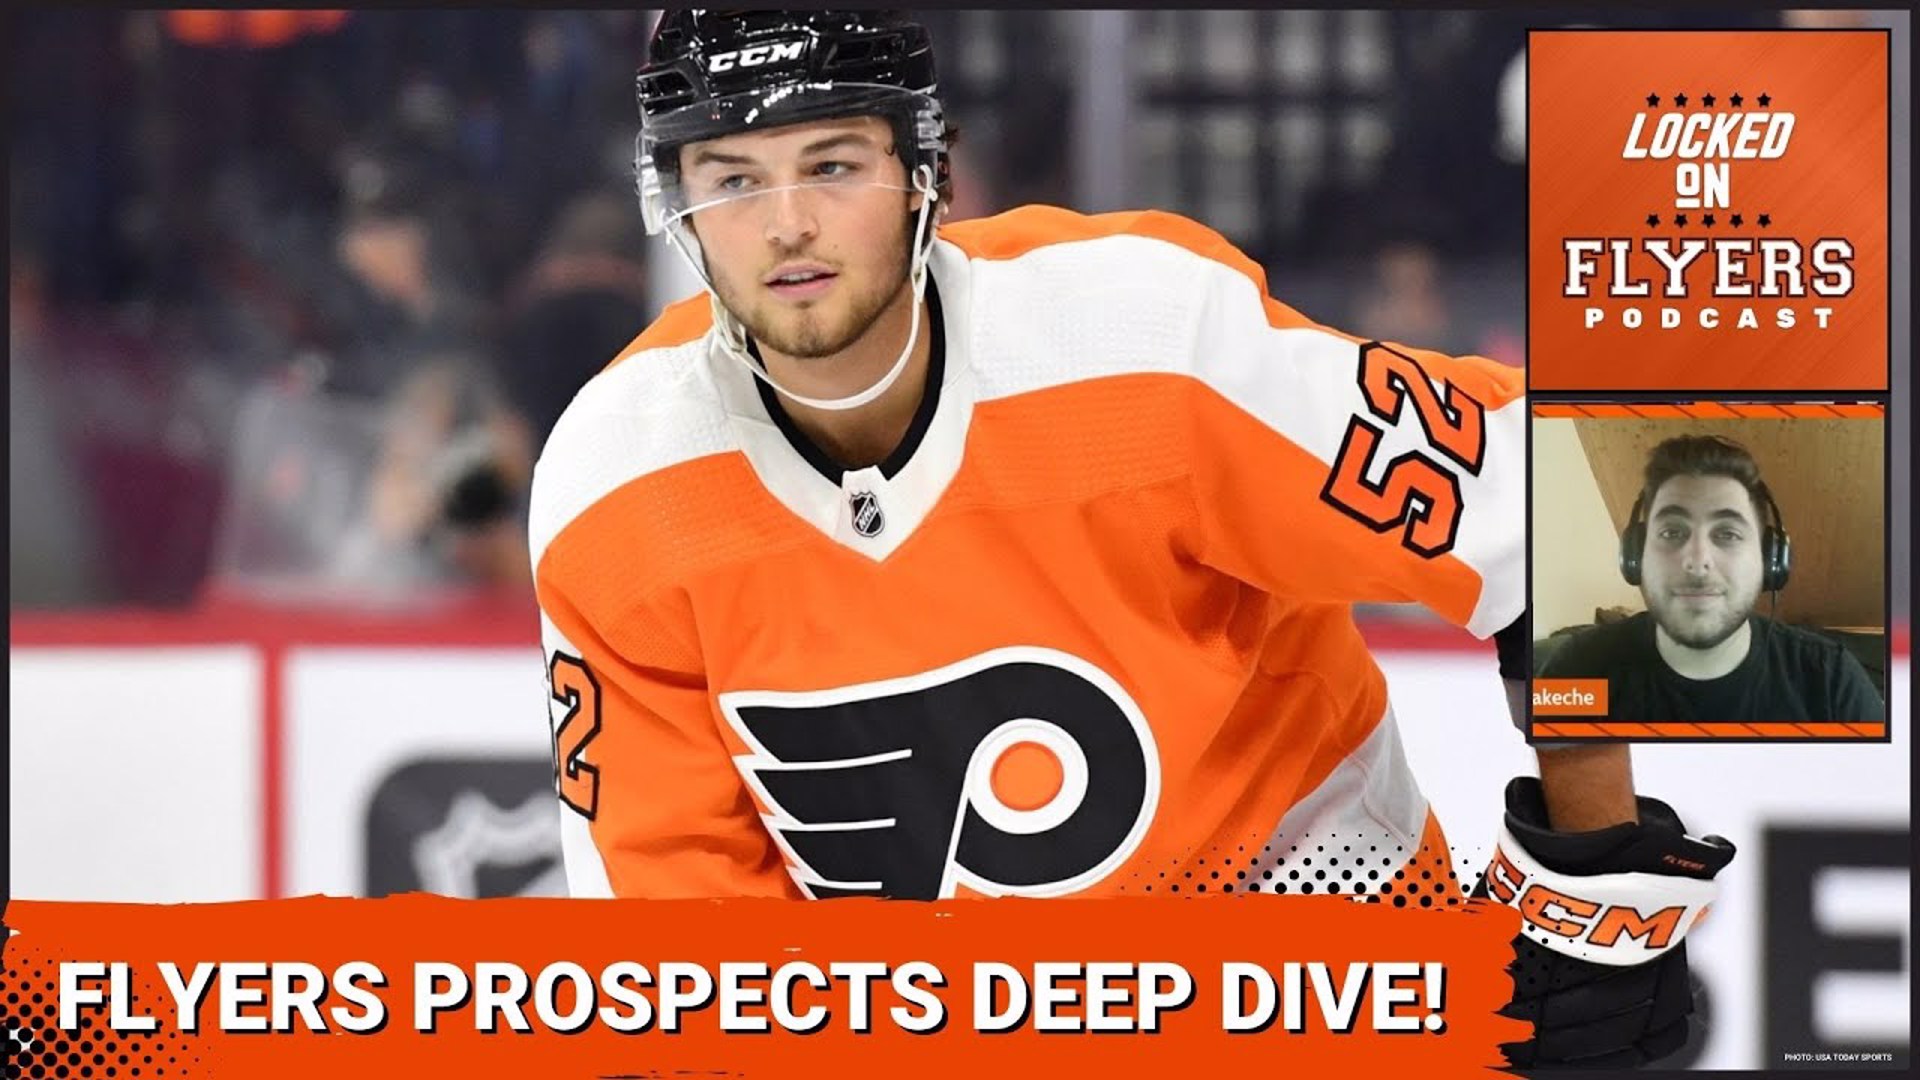 Russ and Rachel are joined by colleague from Locked on NHL Prospects Hadi Kalakeche for a deep dive into the Flyers prospect depth.